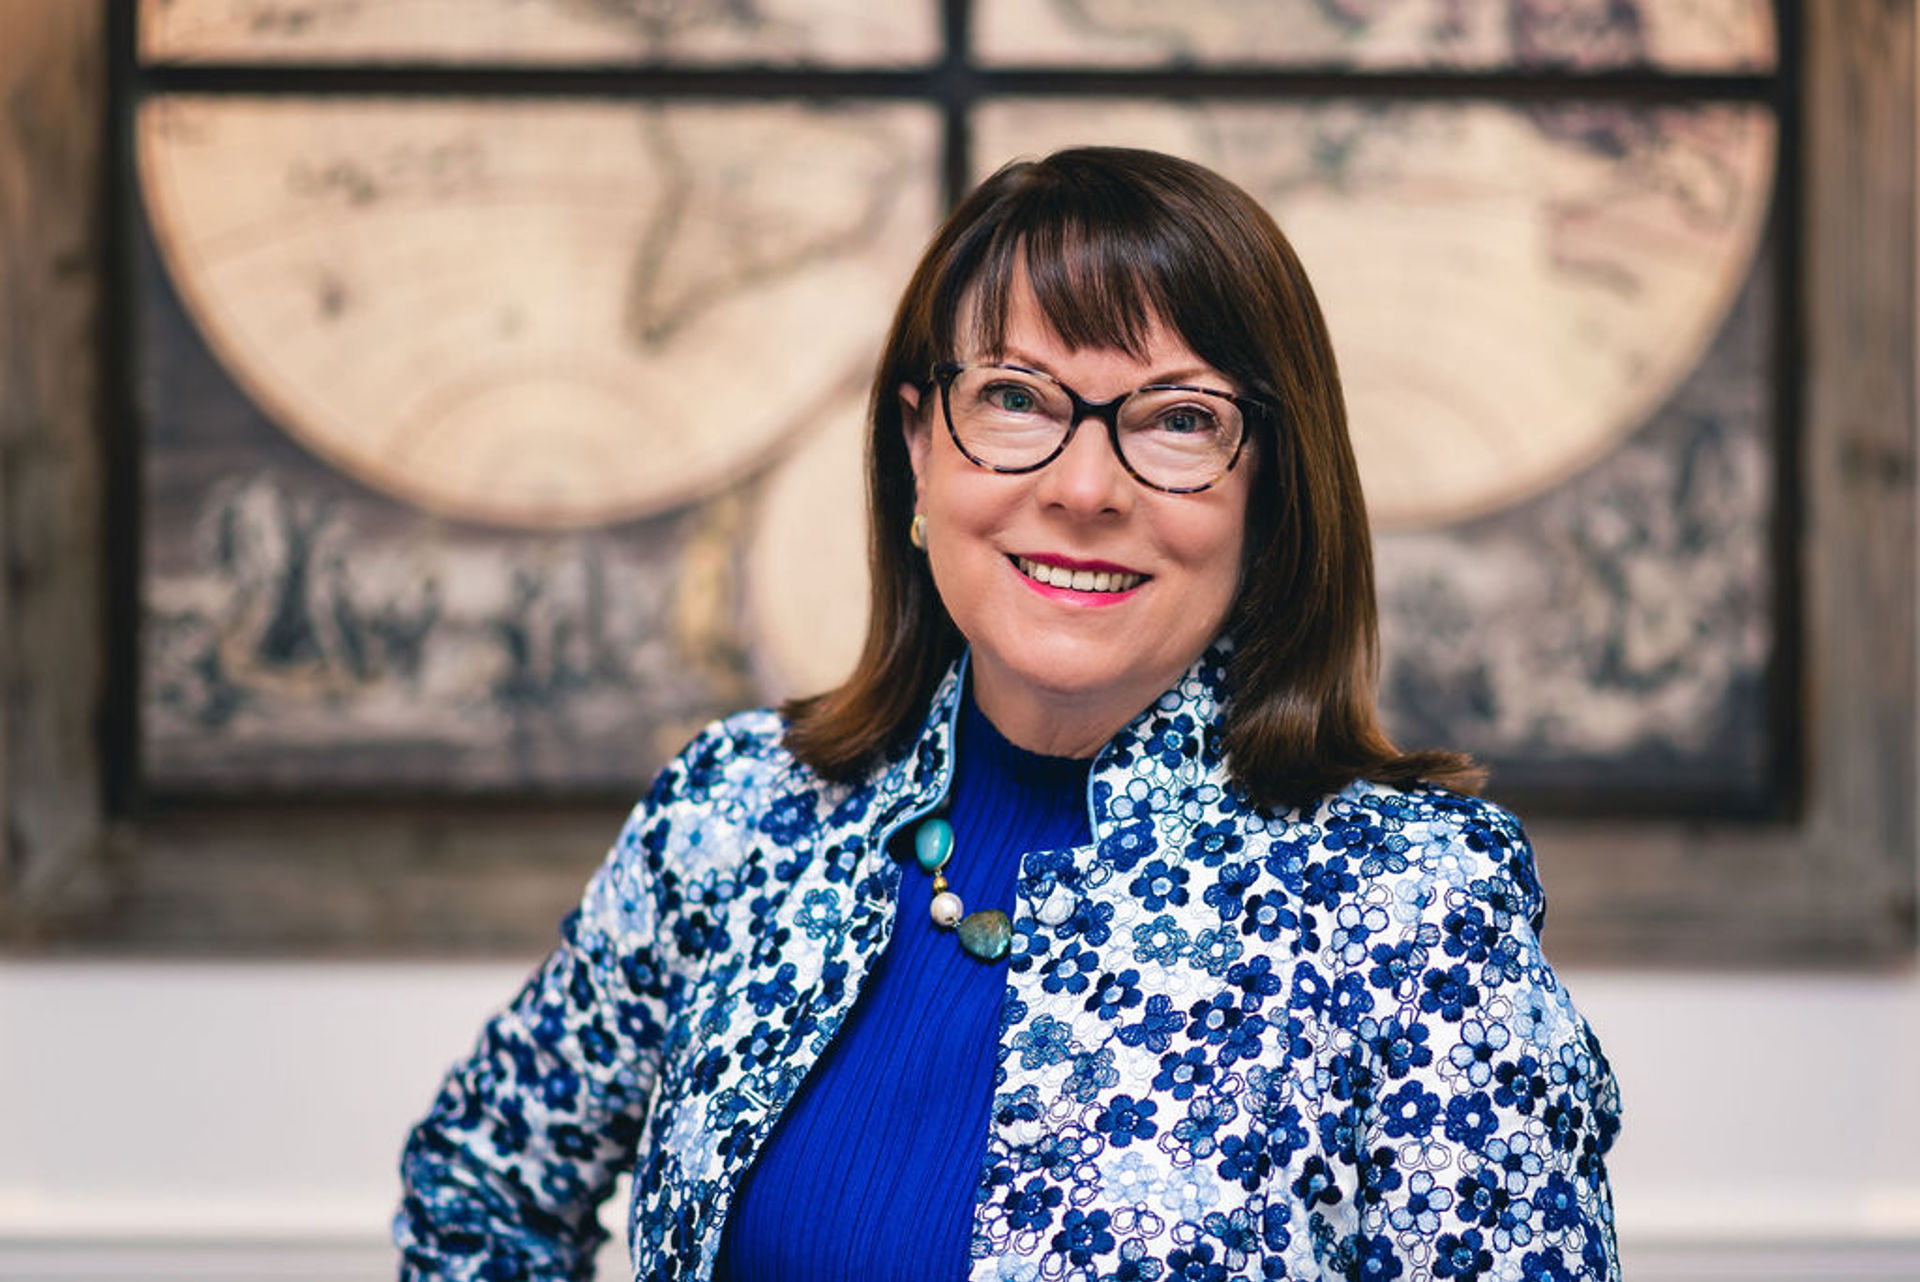 white female with brown hair and rectangle glasses. Wearing blue floral blazer and blue top